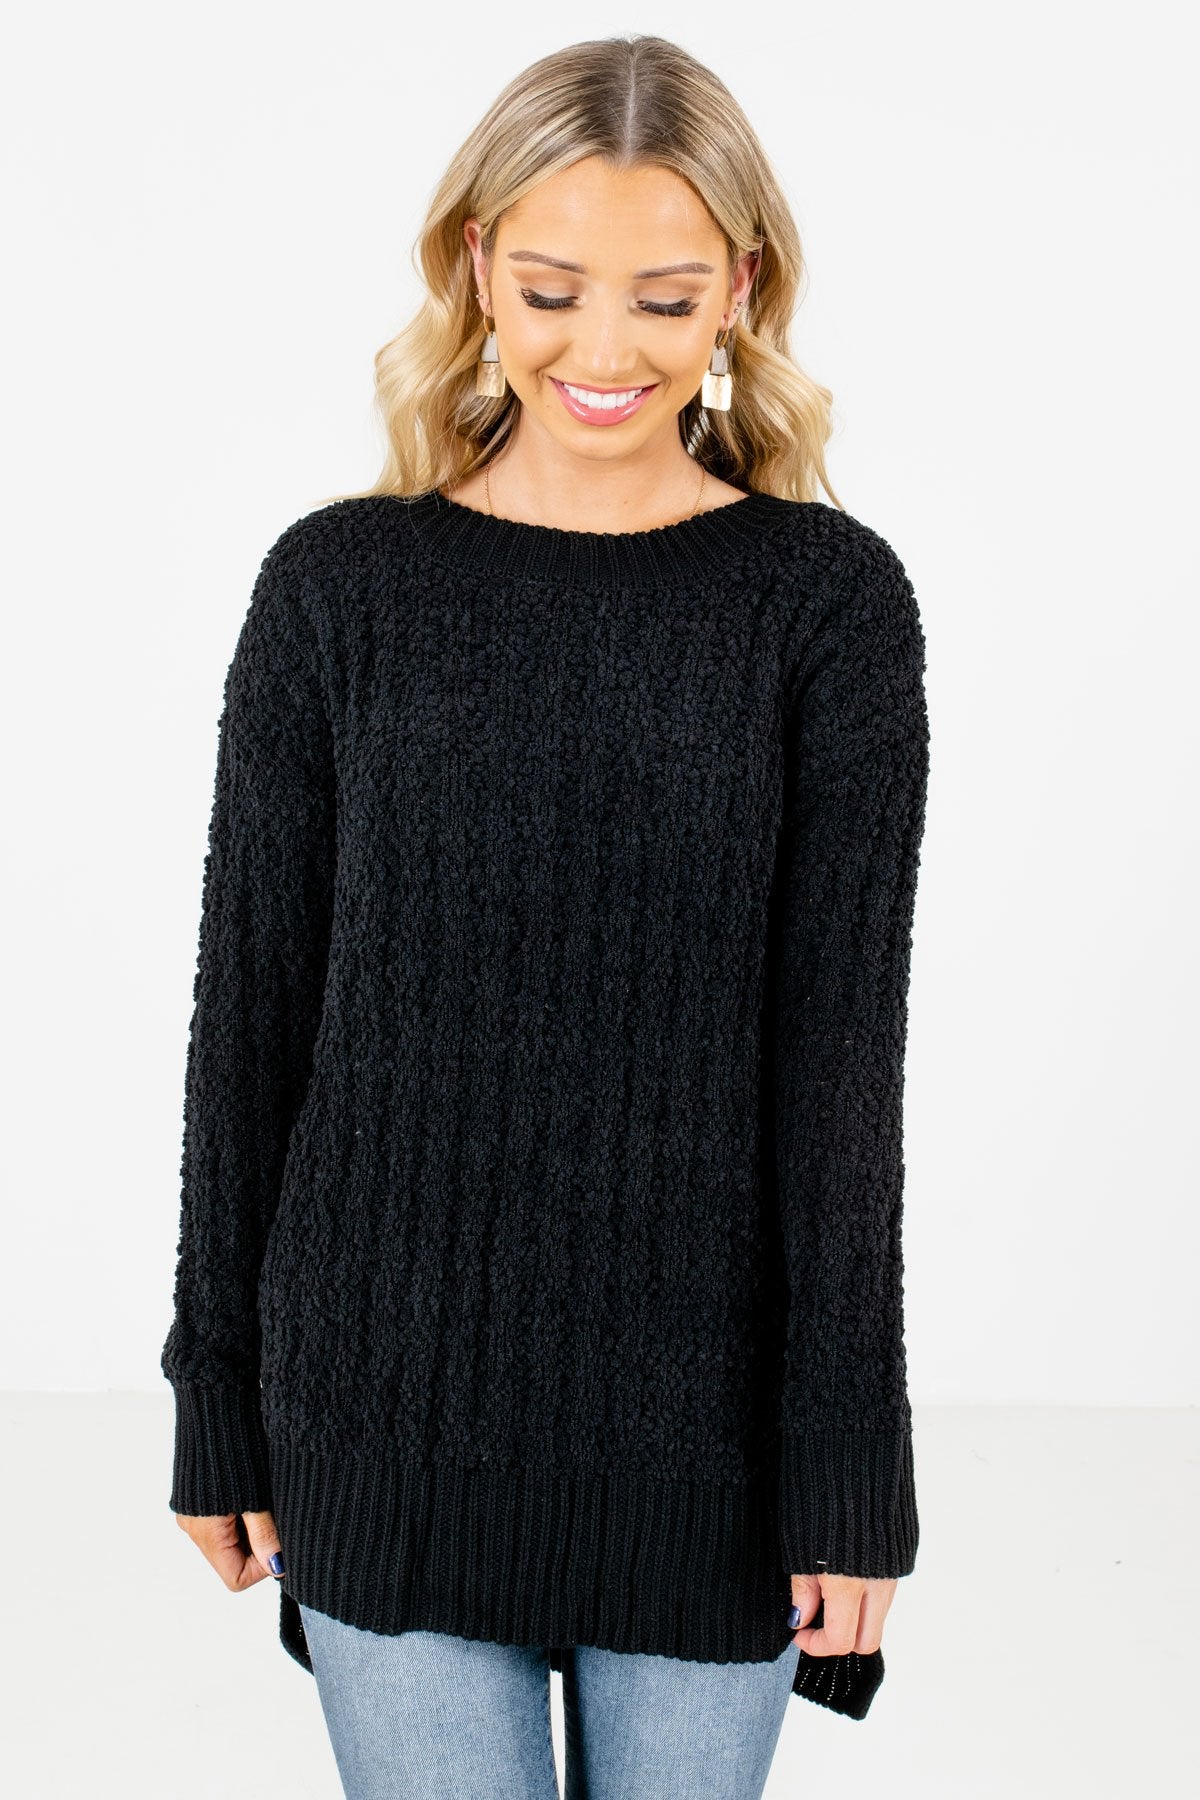 Women’s Black Casual Everyday Boutique Sweater